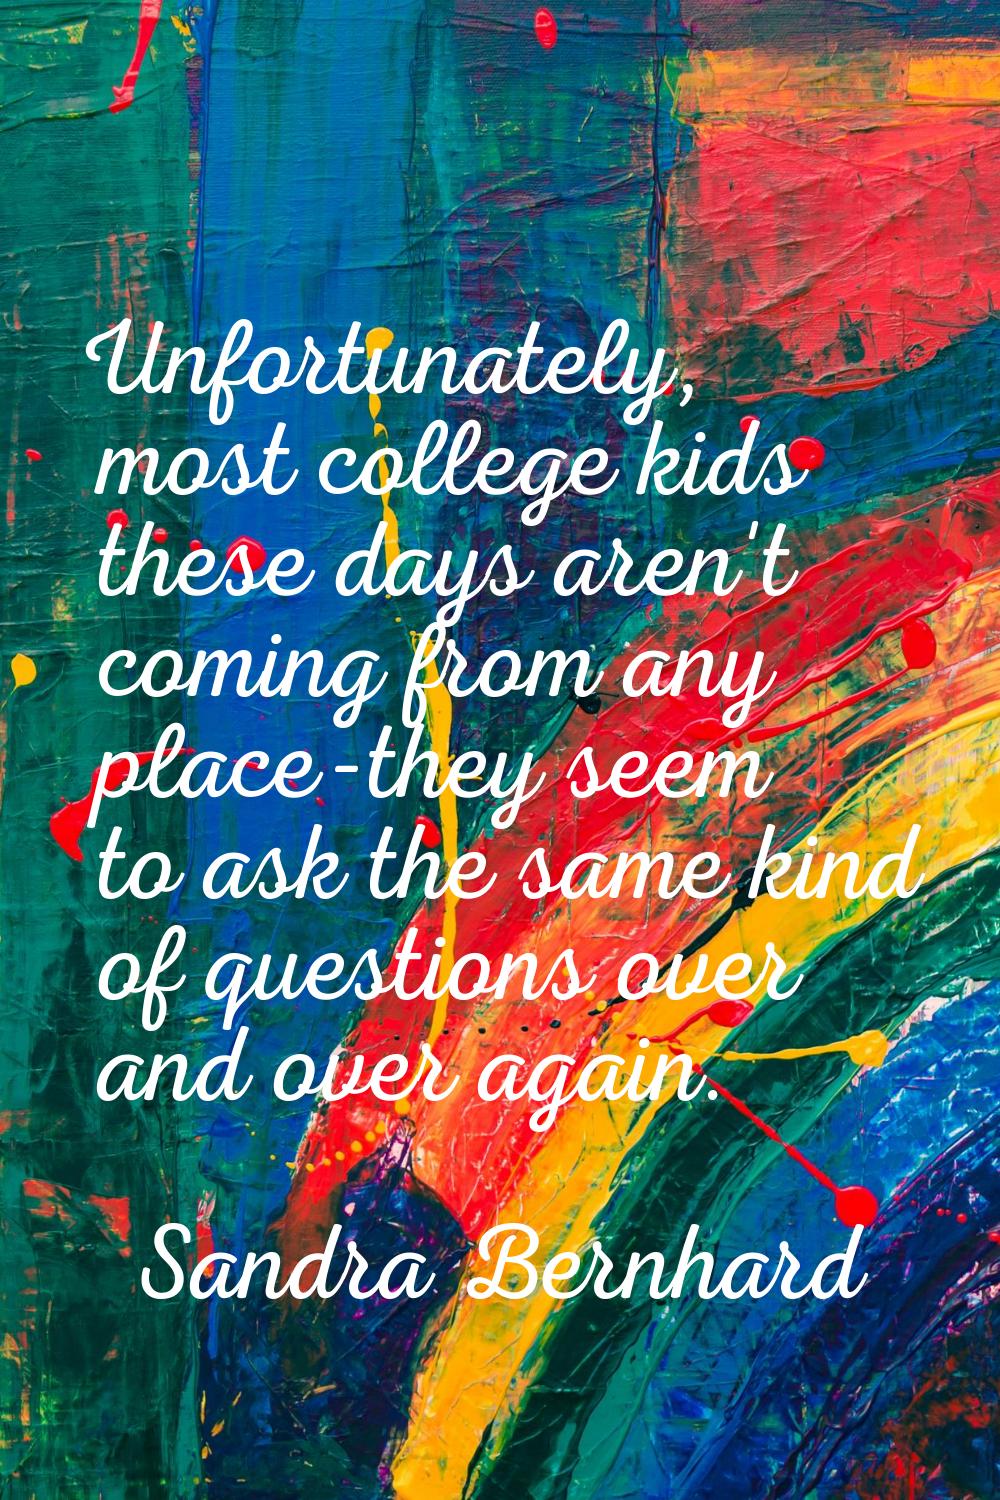 Unfortunately, most college kids these days aren't coming from any place-they seem to ask the same 